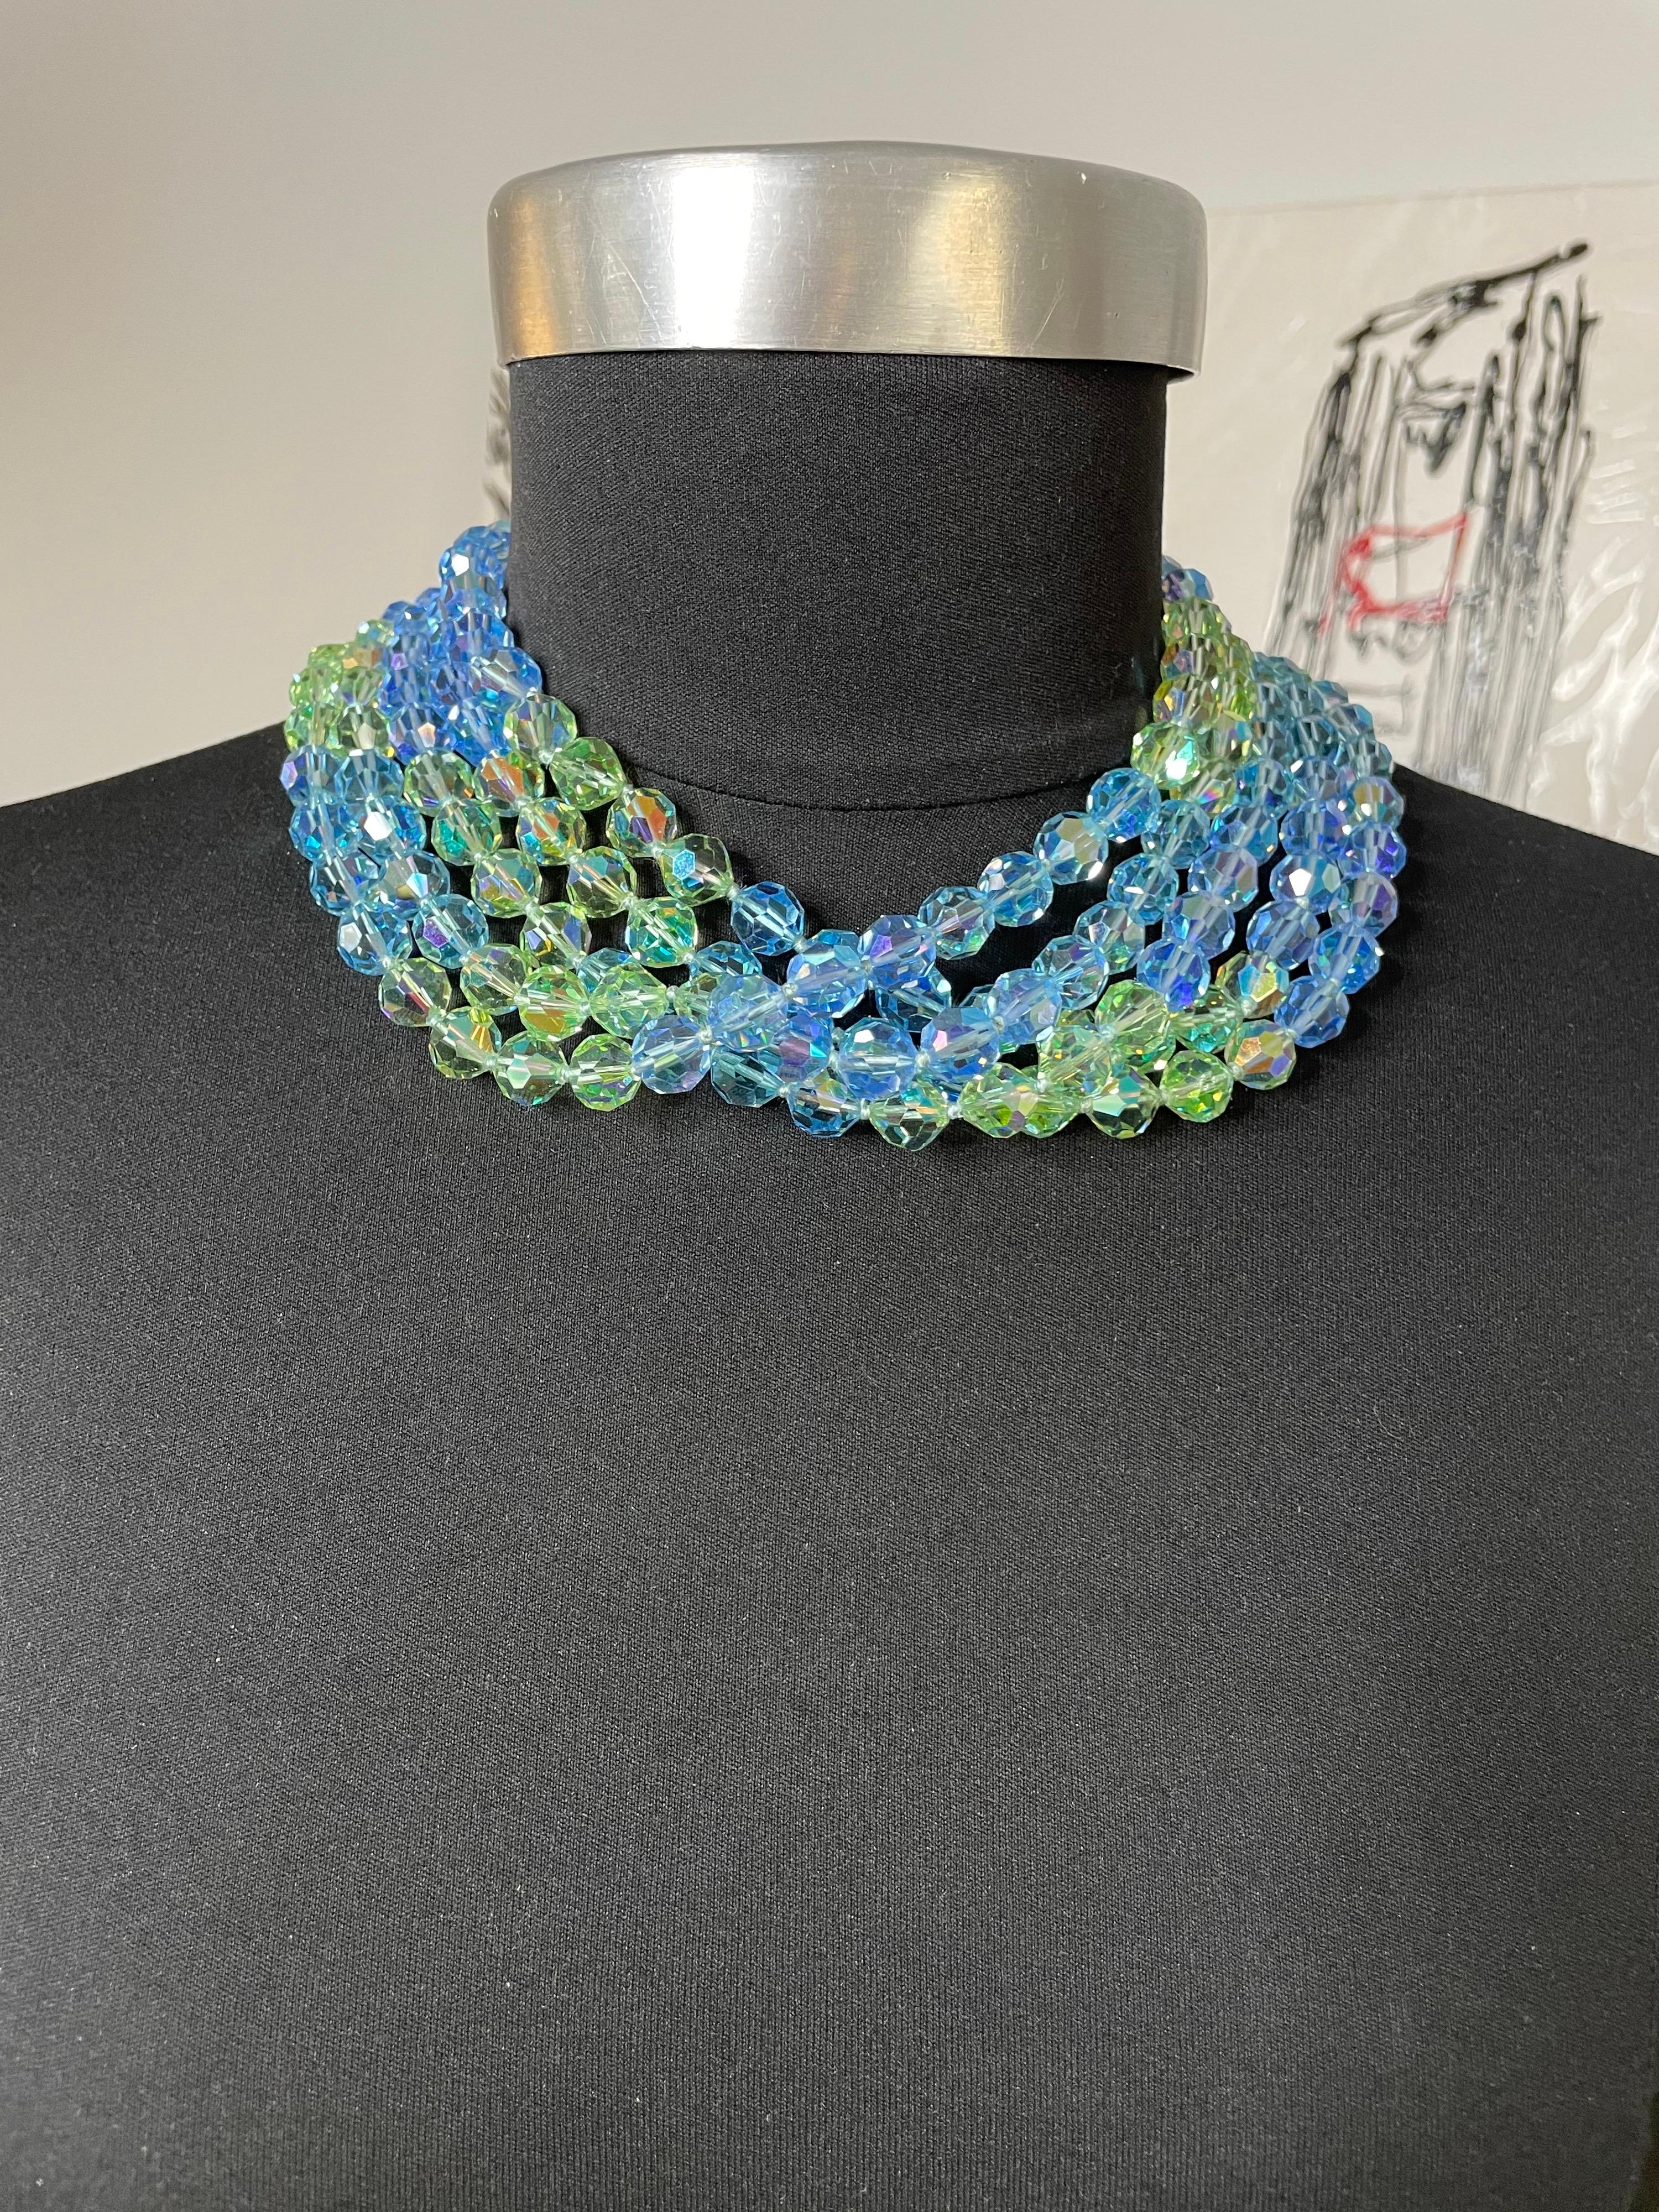  5 Strand Blue Green Crystal Bib Necklace New, Never worn 1990s Ciner  In Excellent Condition For Sale In Wallkill, NY